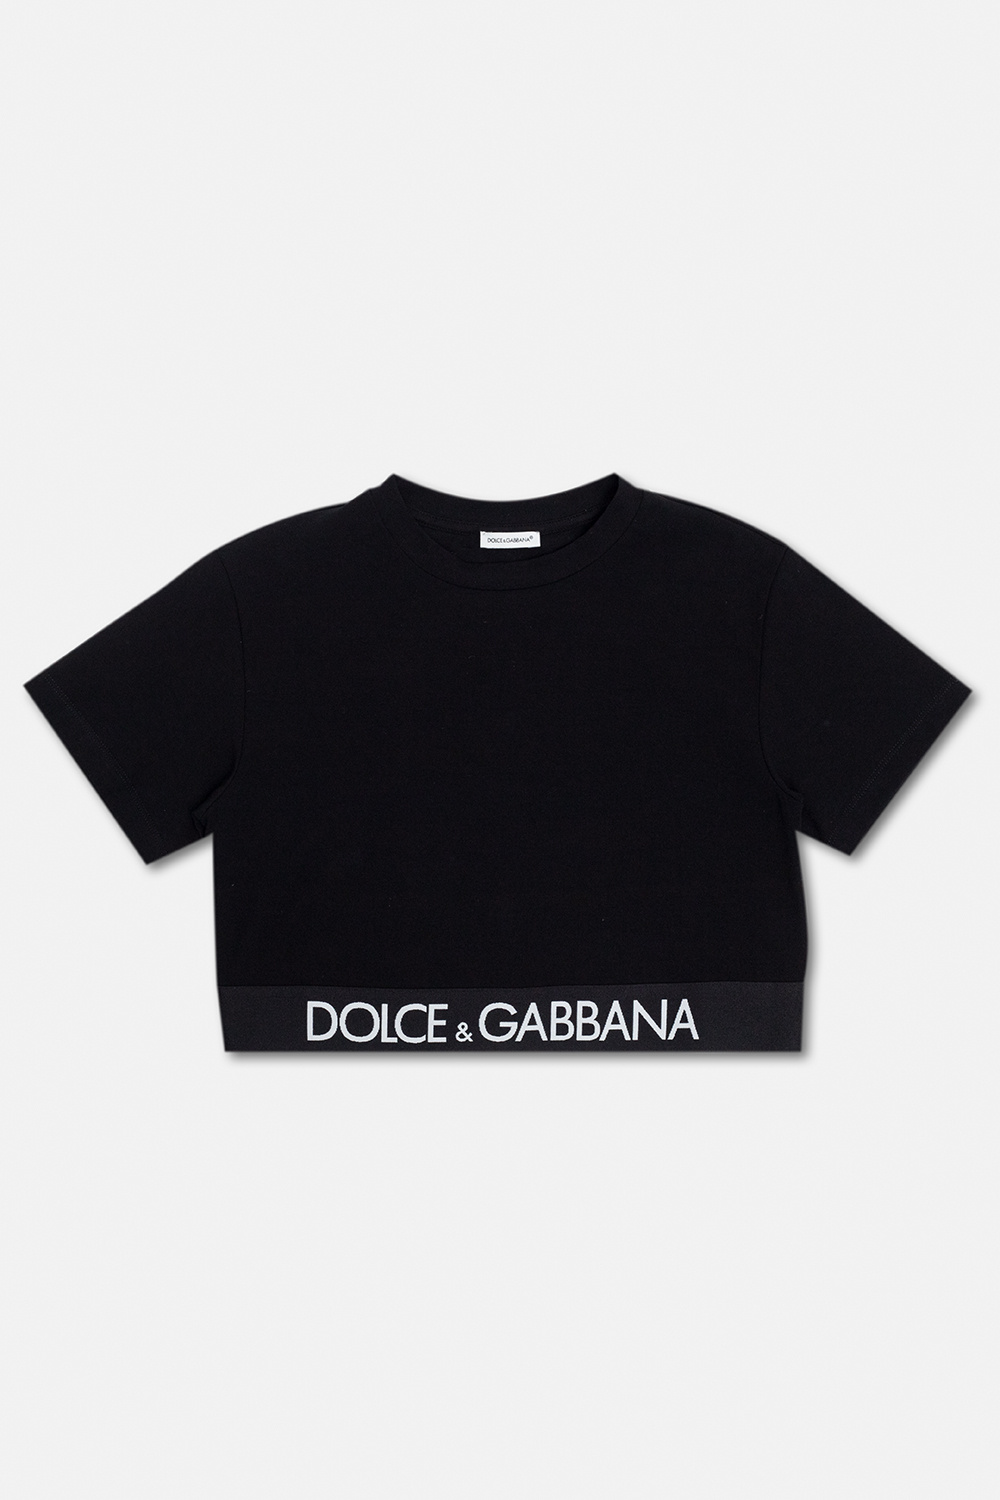 Dolce & Gabbana Satin Top With Contrasting Inserts Top with logo